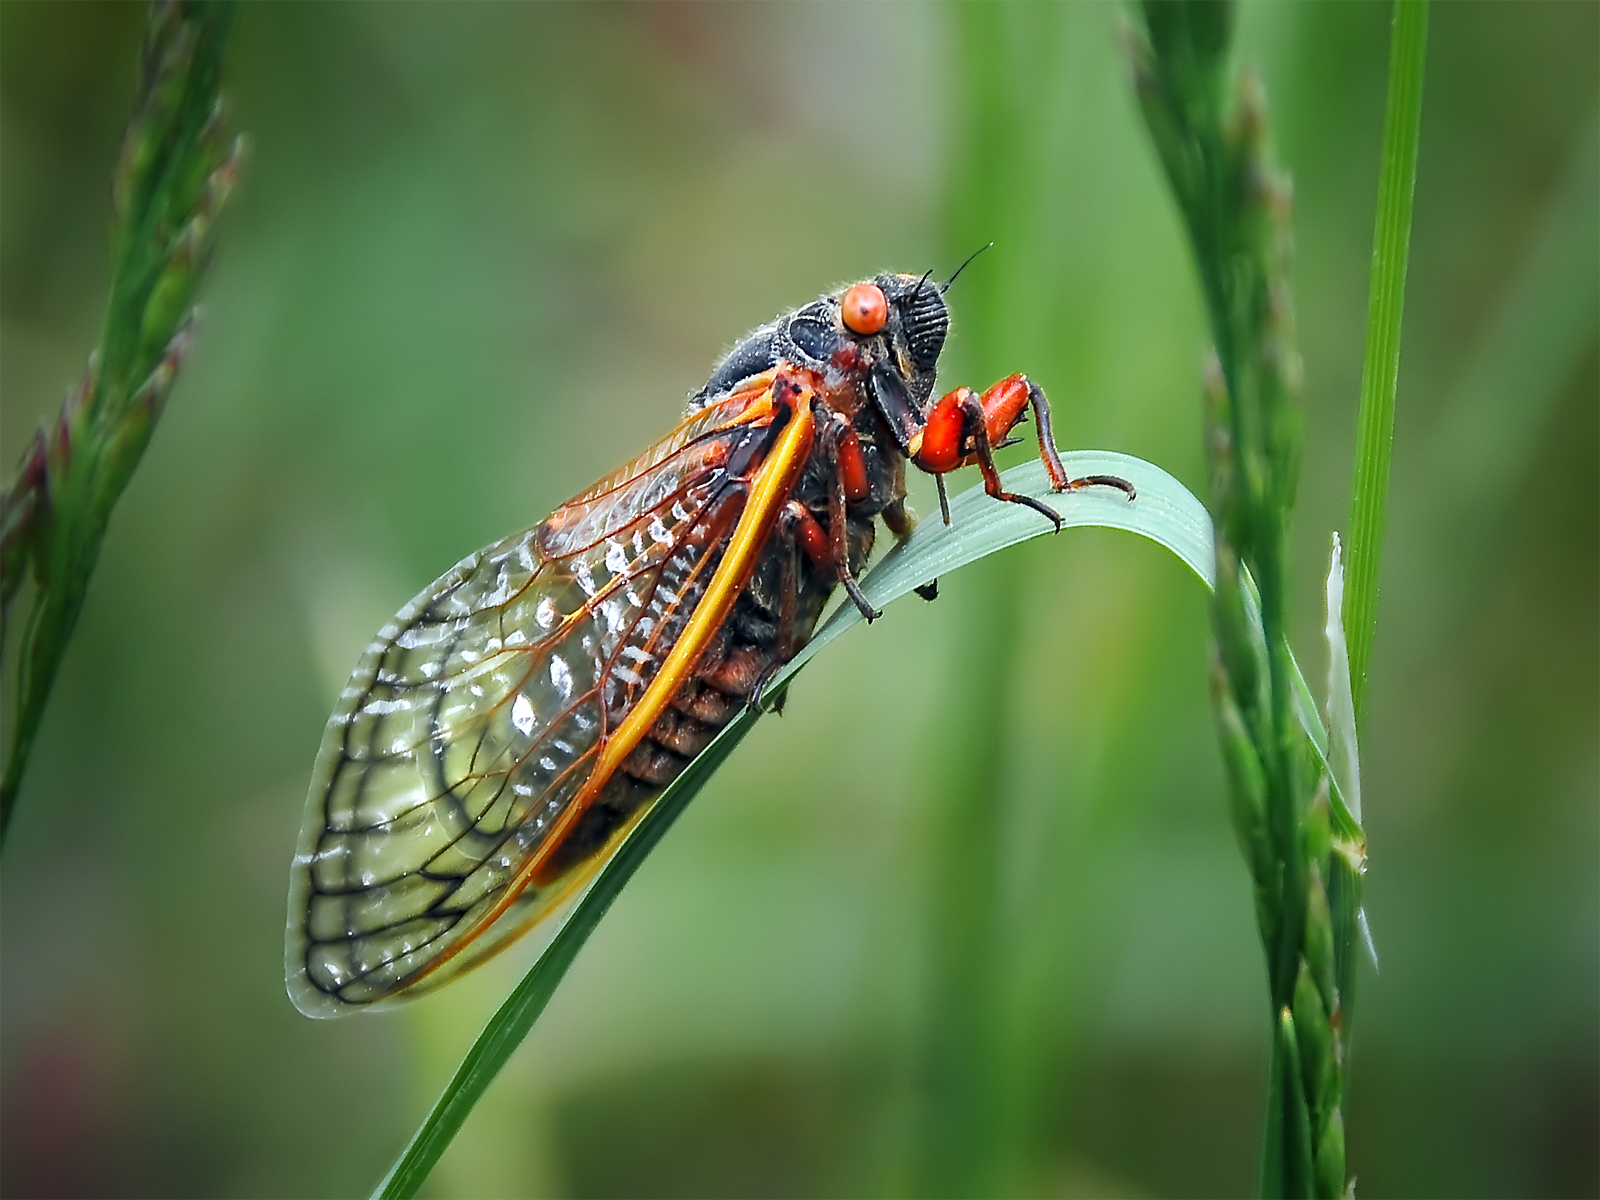 Trillions of Brood 10 cicadas to emerge in U.S. after 17 years